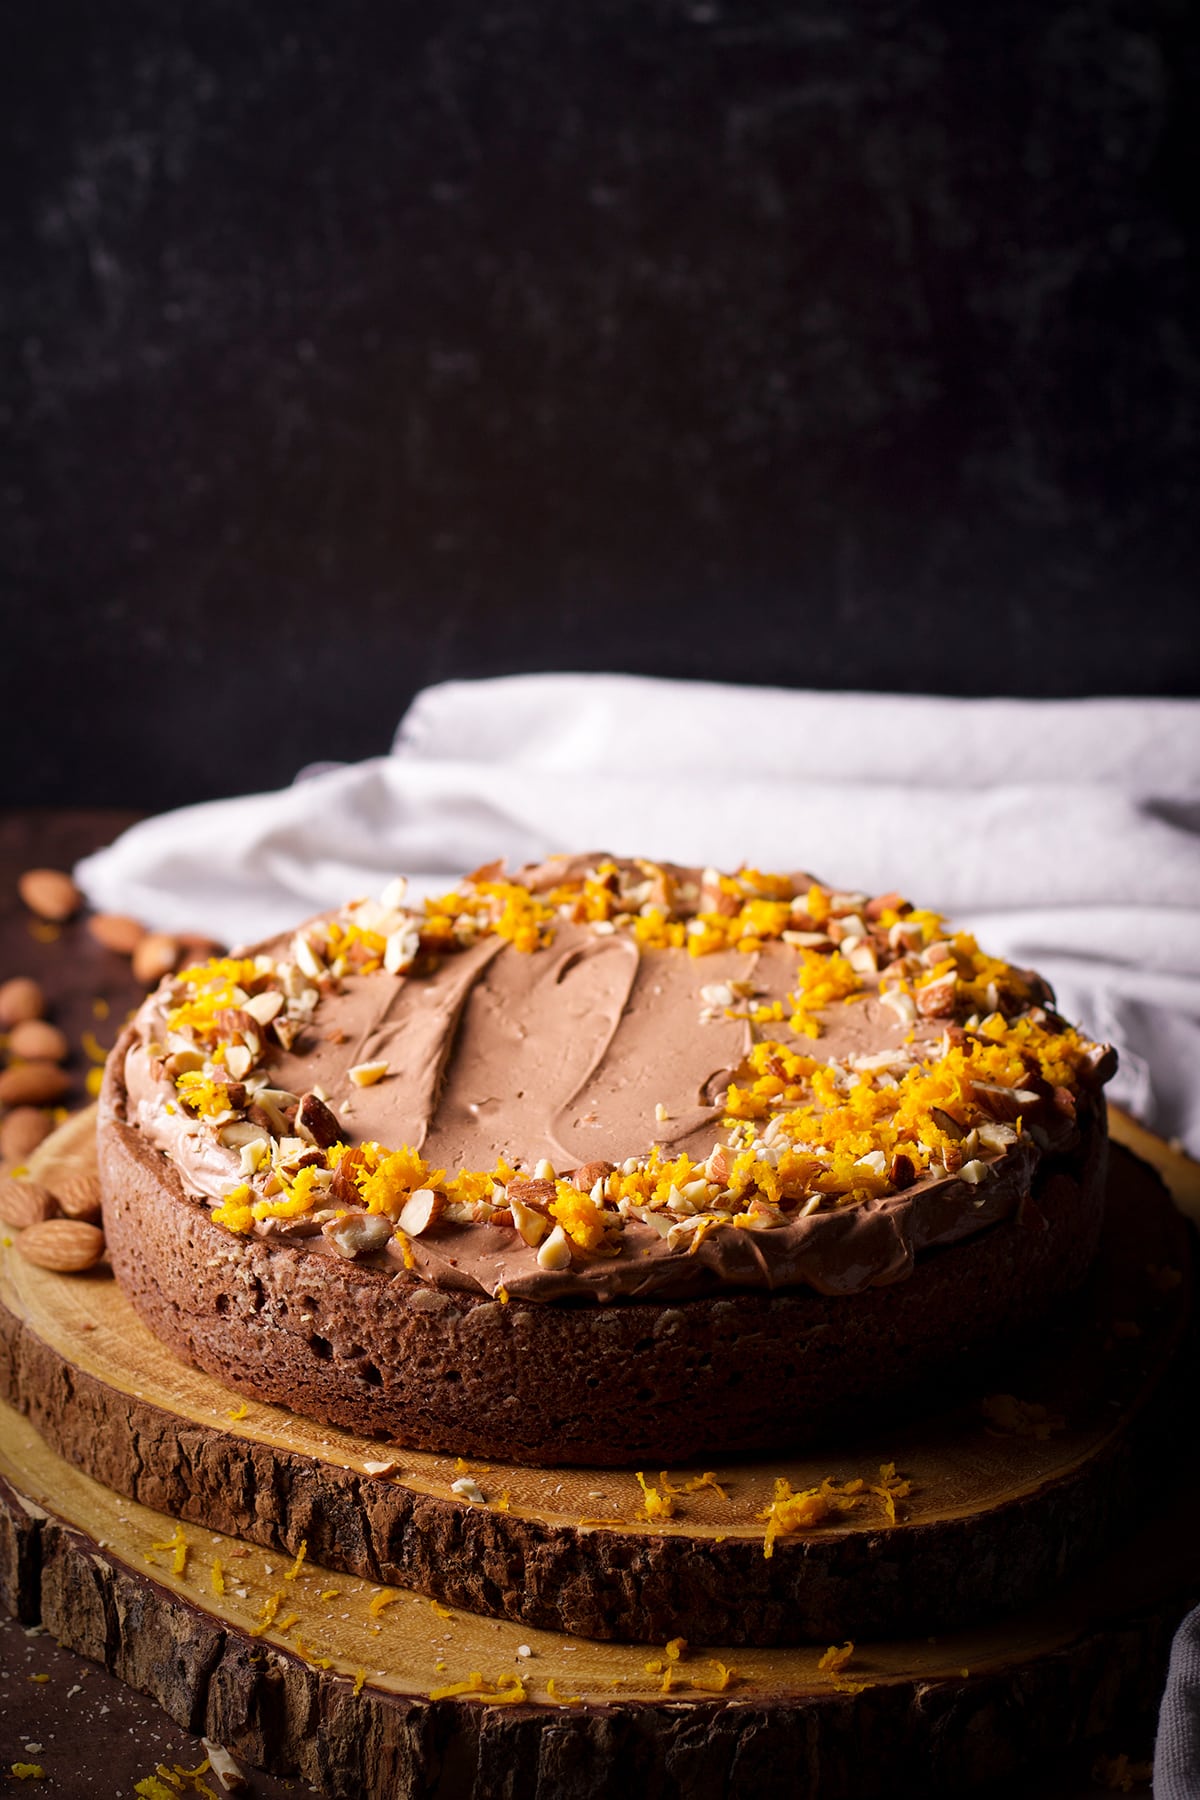 A one layer chocolate almond cake on a wood cake tray. The cake has been frosted with chocolate orange buttercream and decorated with chopped almonds and orange zest.